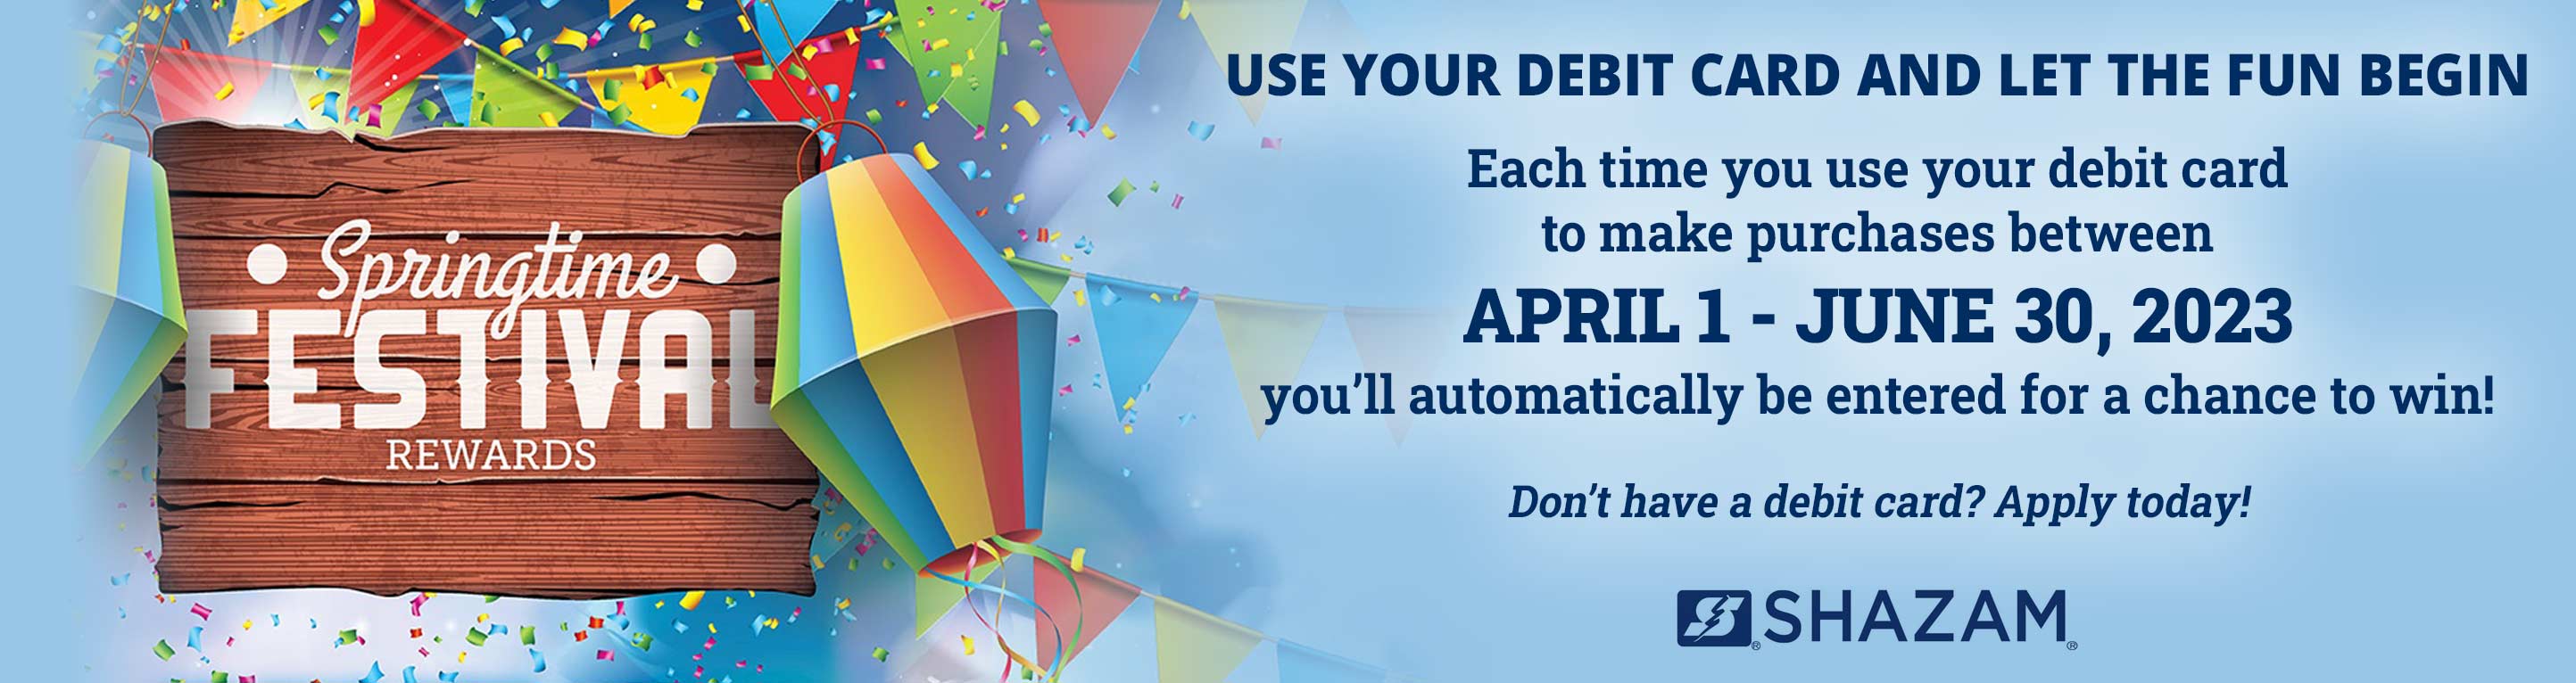 Springtime Festival Rewards. Use your debit card and let the fun begin. Each time you use your debit card to make purchases between April 1 - June 30, 2023 you'll automatically be entered for a chance to win! Don't have a debit card? Apply today!